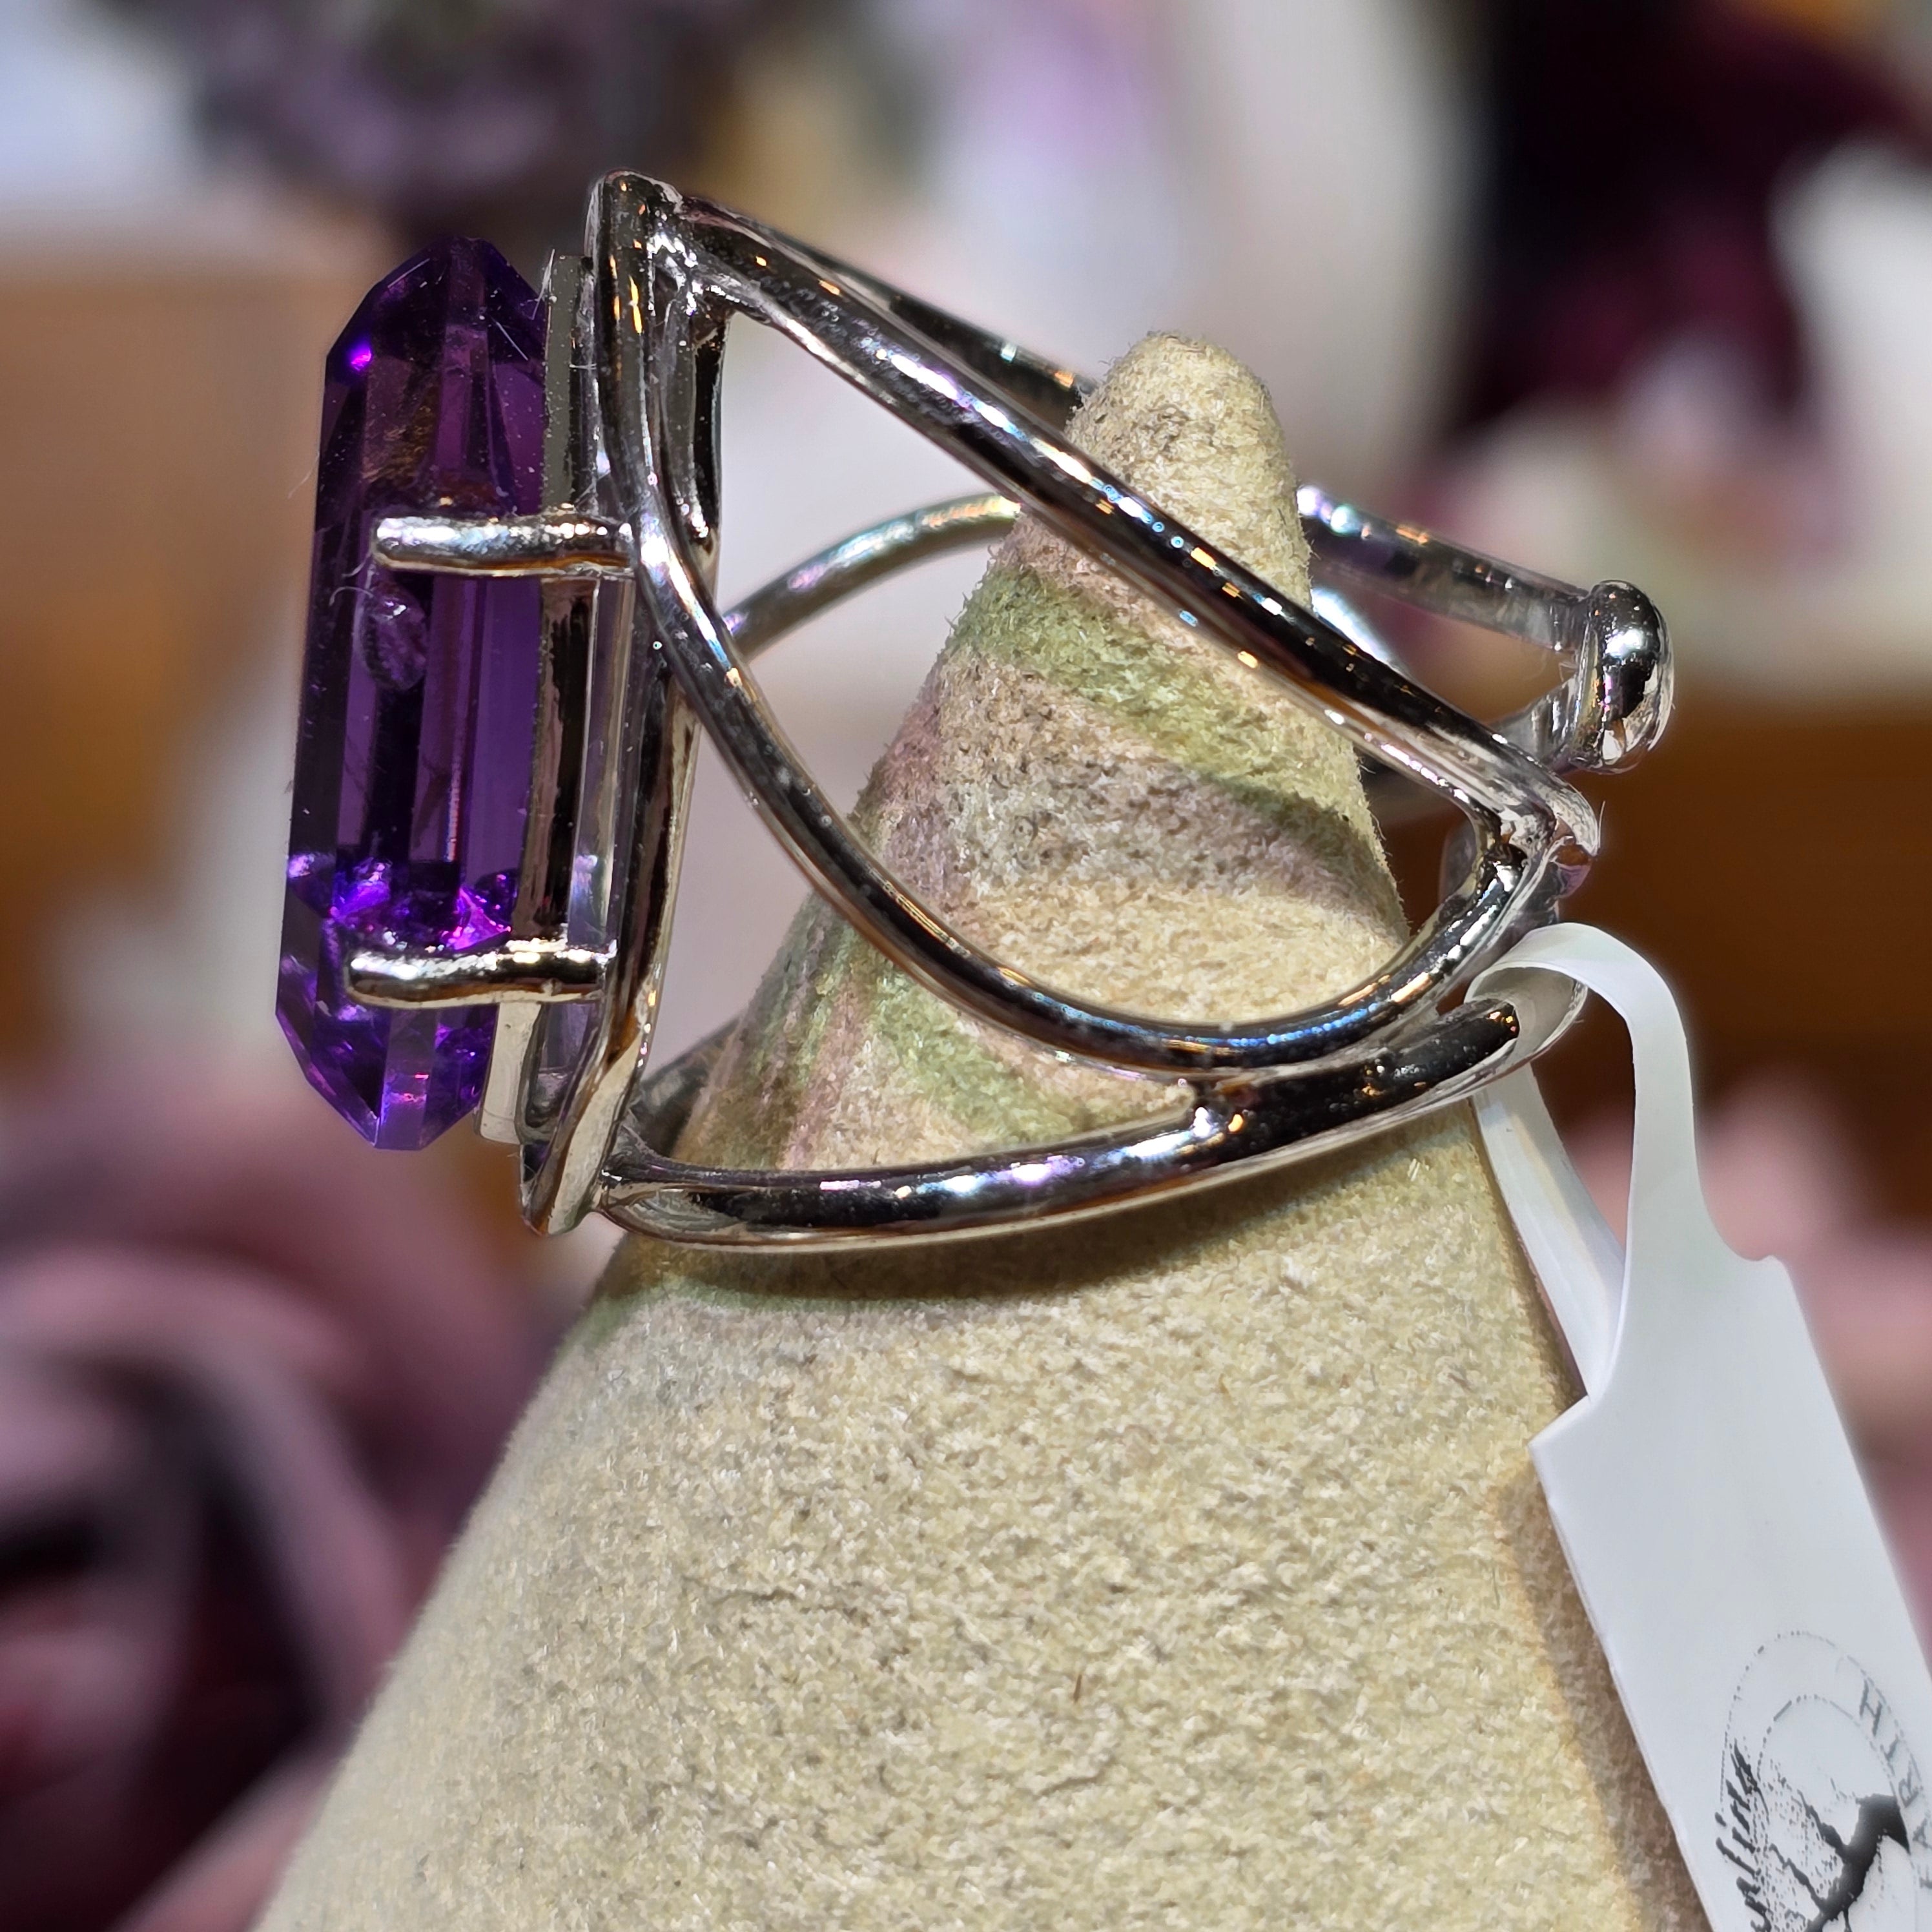 Amethyst Mother Mary Finger Cuff Adjustable Ring .925 Silver for Divine Connection and Energy Purification